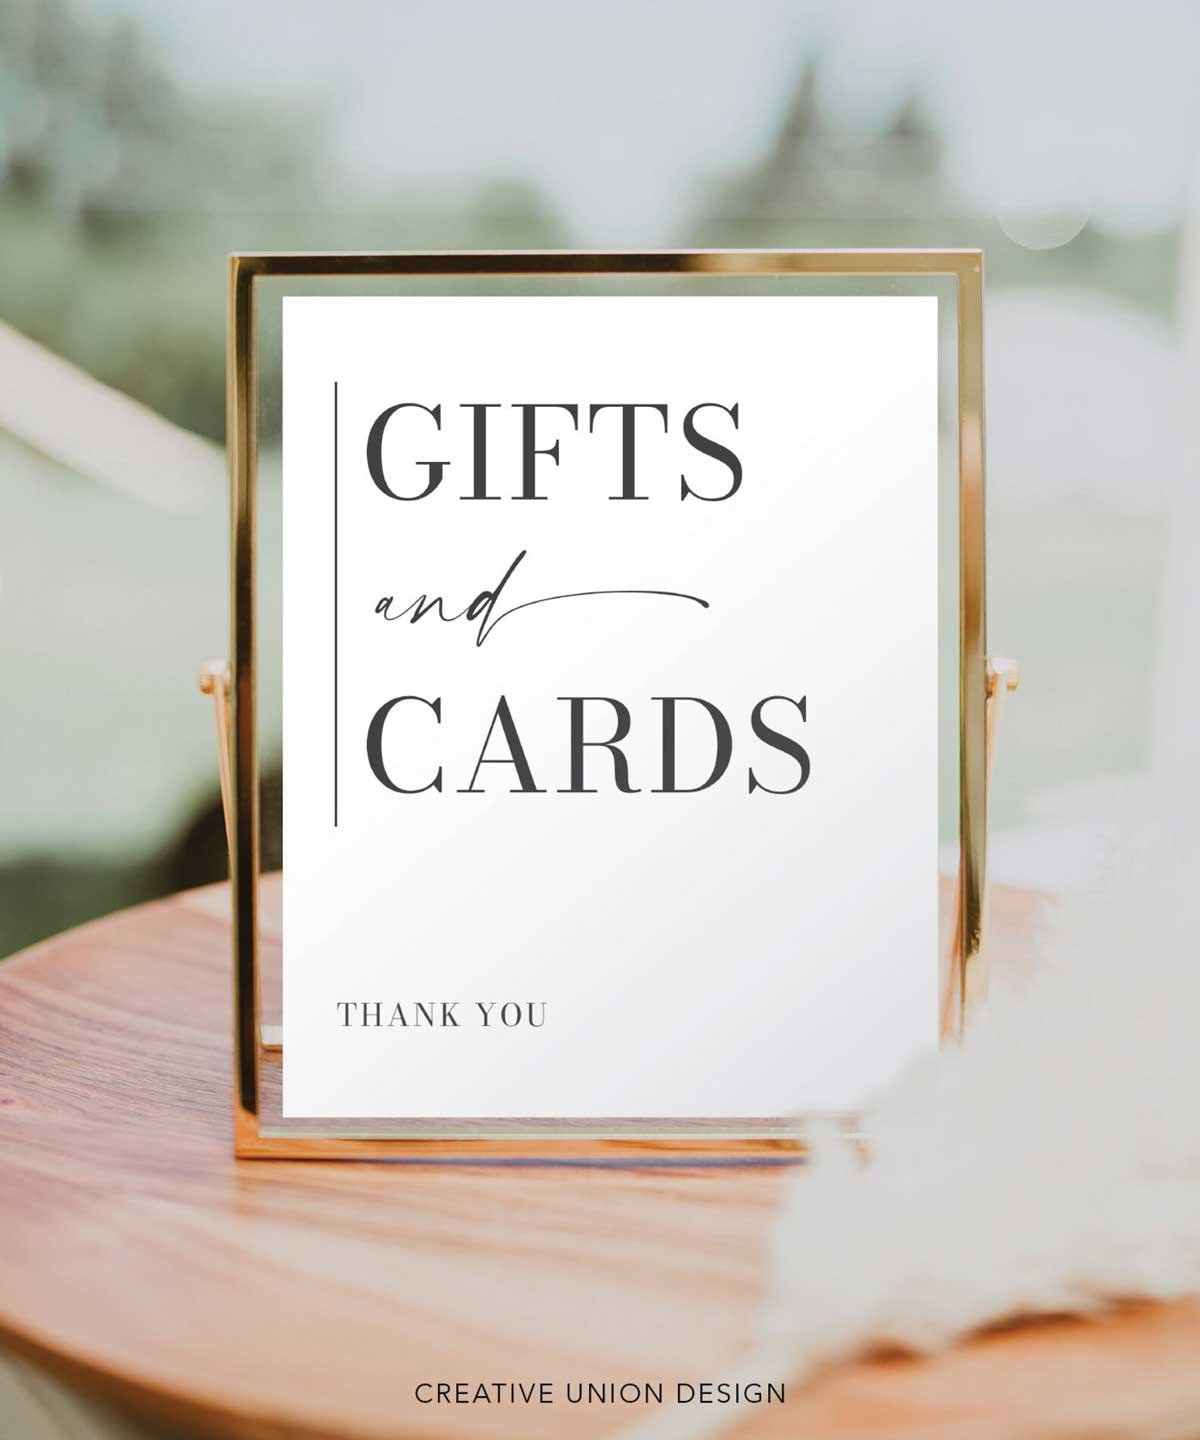 Wedding Gifts and Cards sign